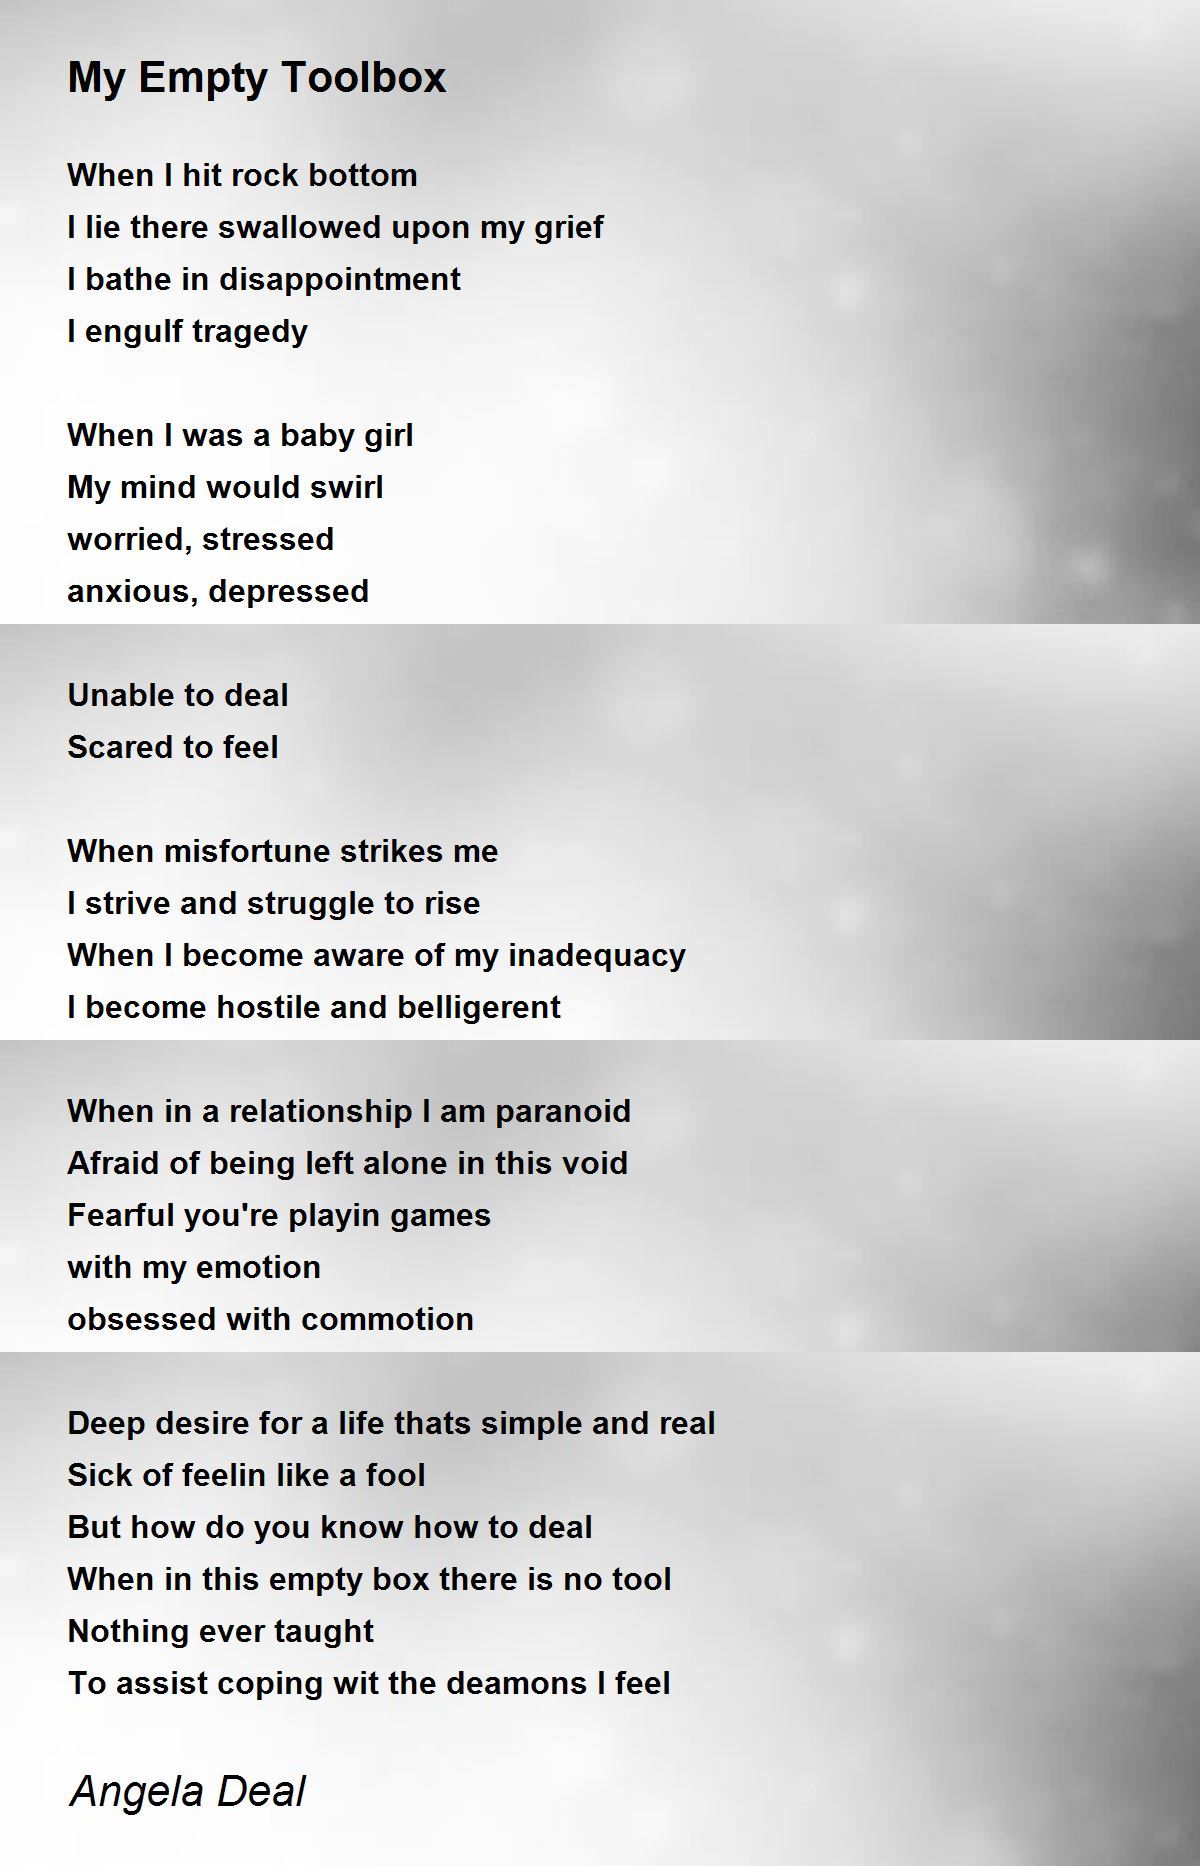 My Empty Toolbox - My Empty Toolbox Poem by Angela Deal